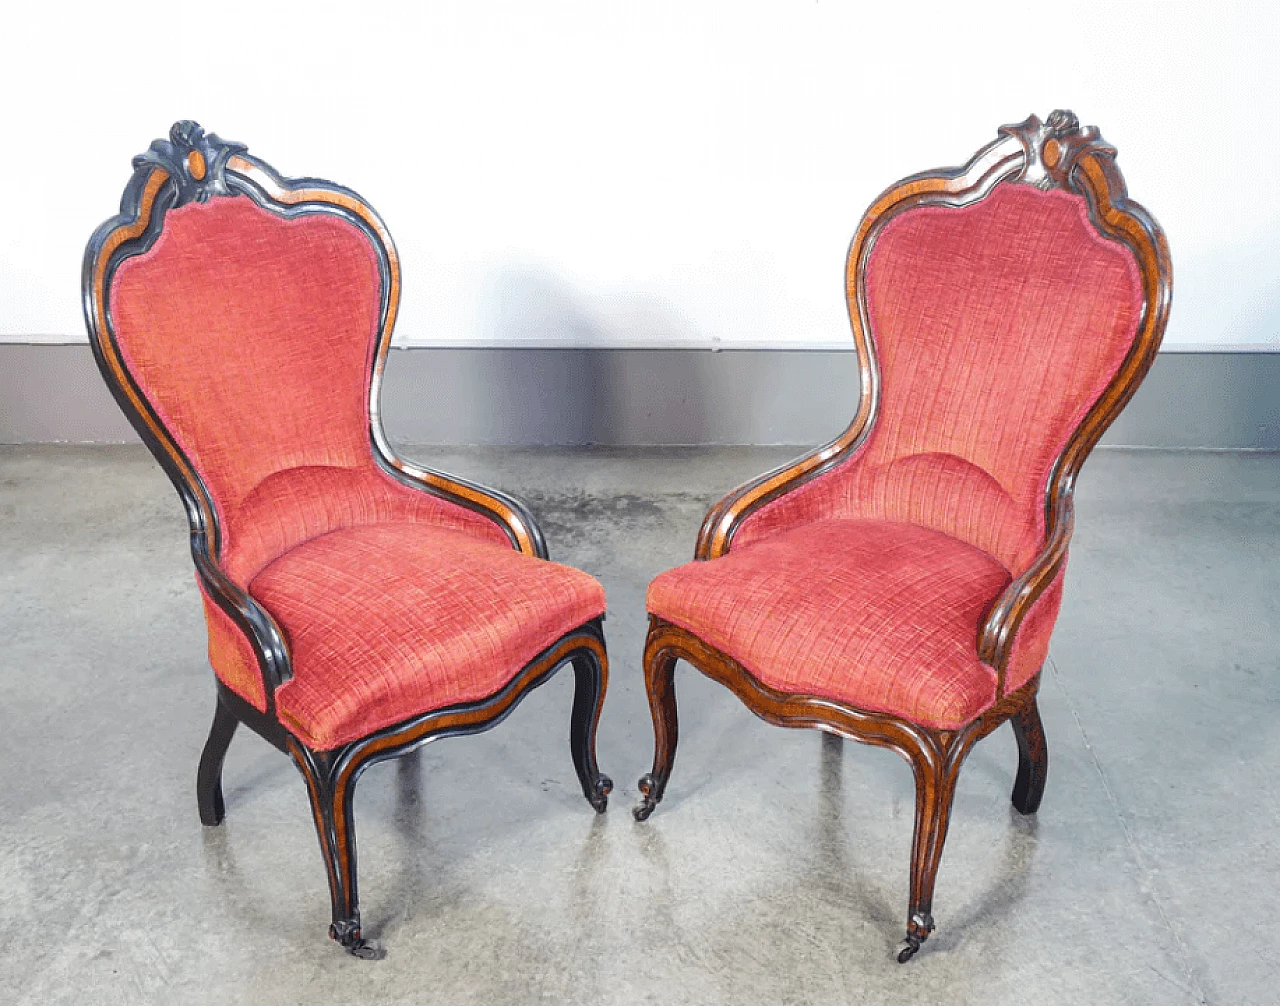 Pair of wooden armchairs, 19th century 1